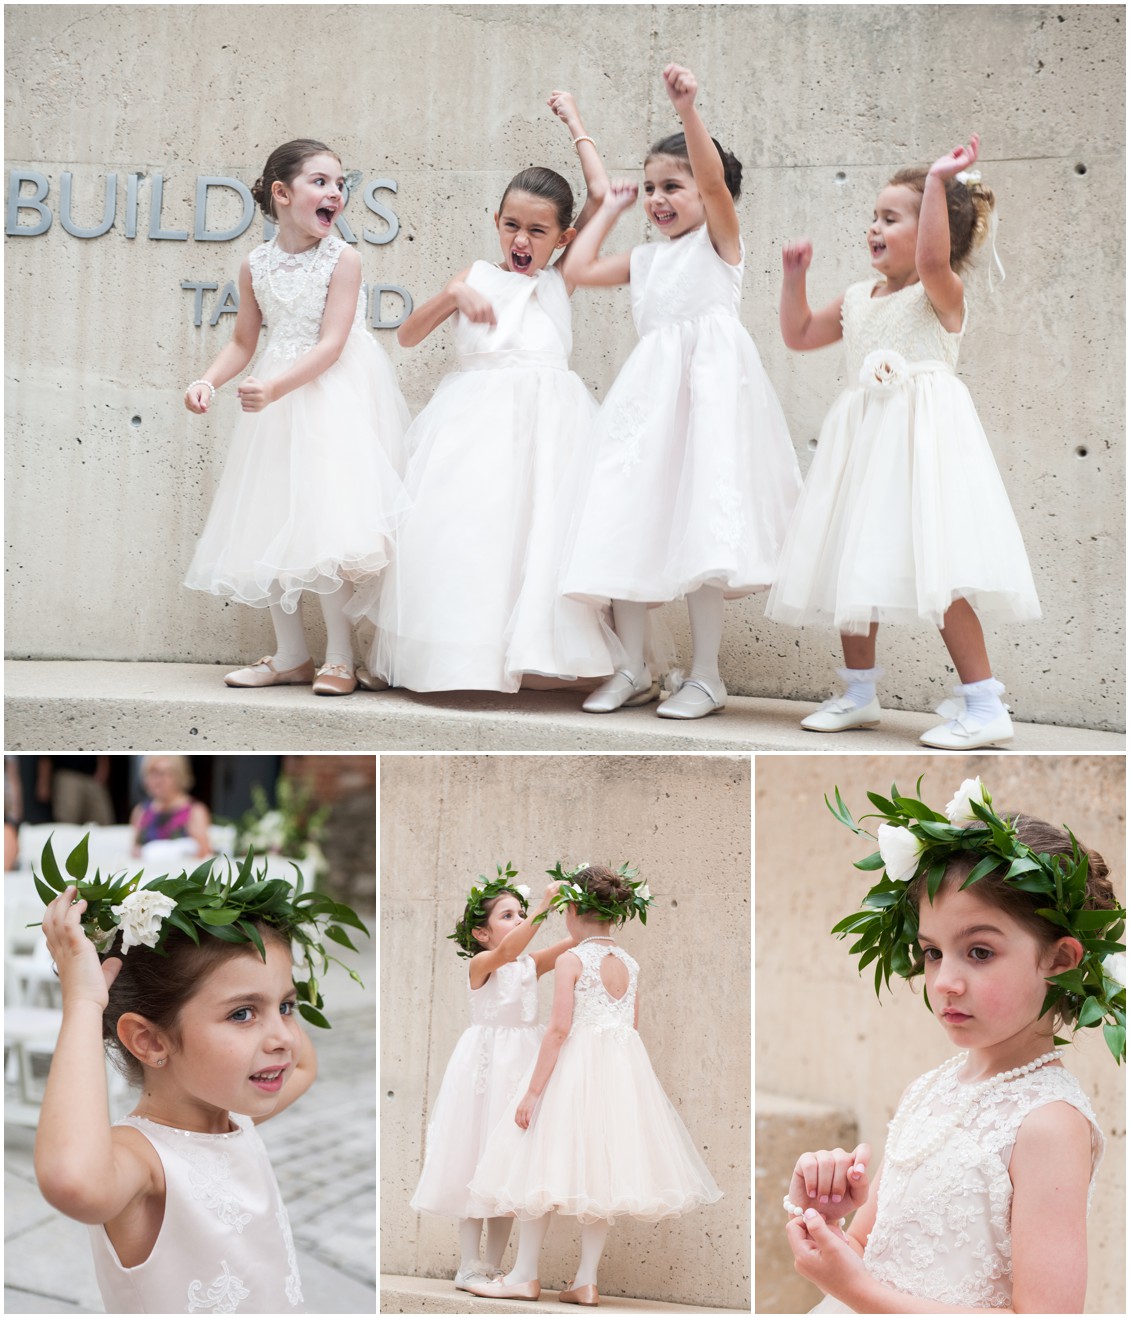 Baltimore Wedding flowergirls at American Visionary Art Museum by Melissa Grimes-Guy Photography